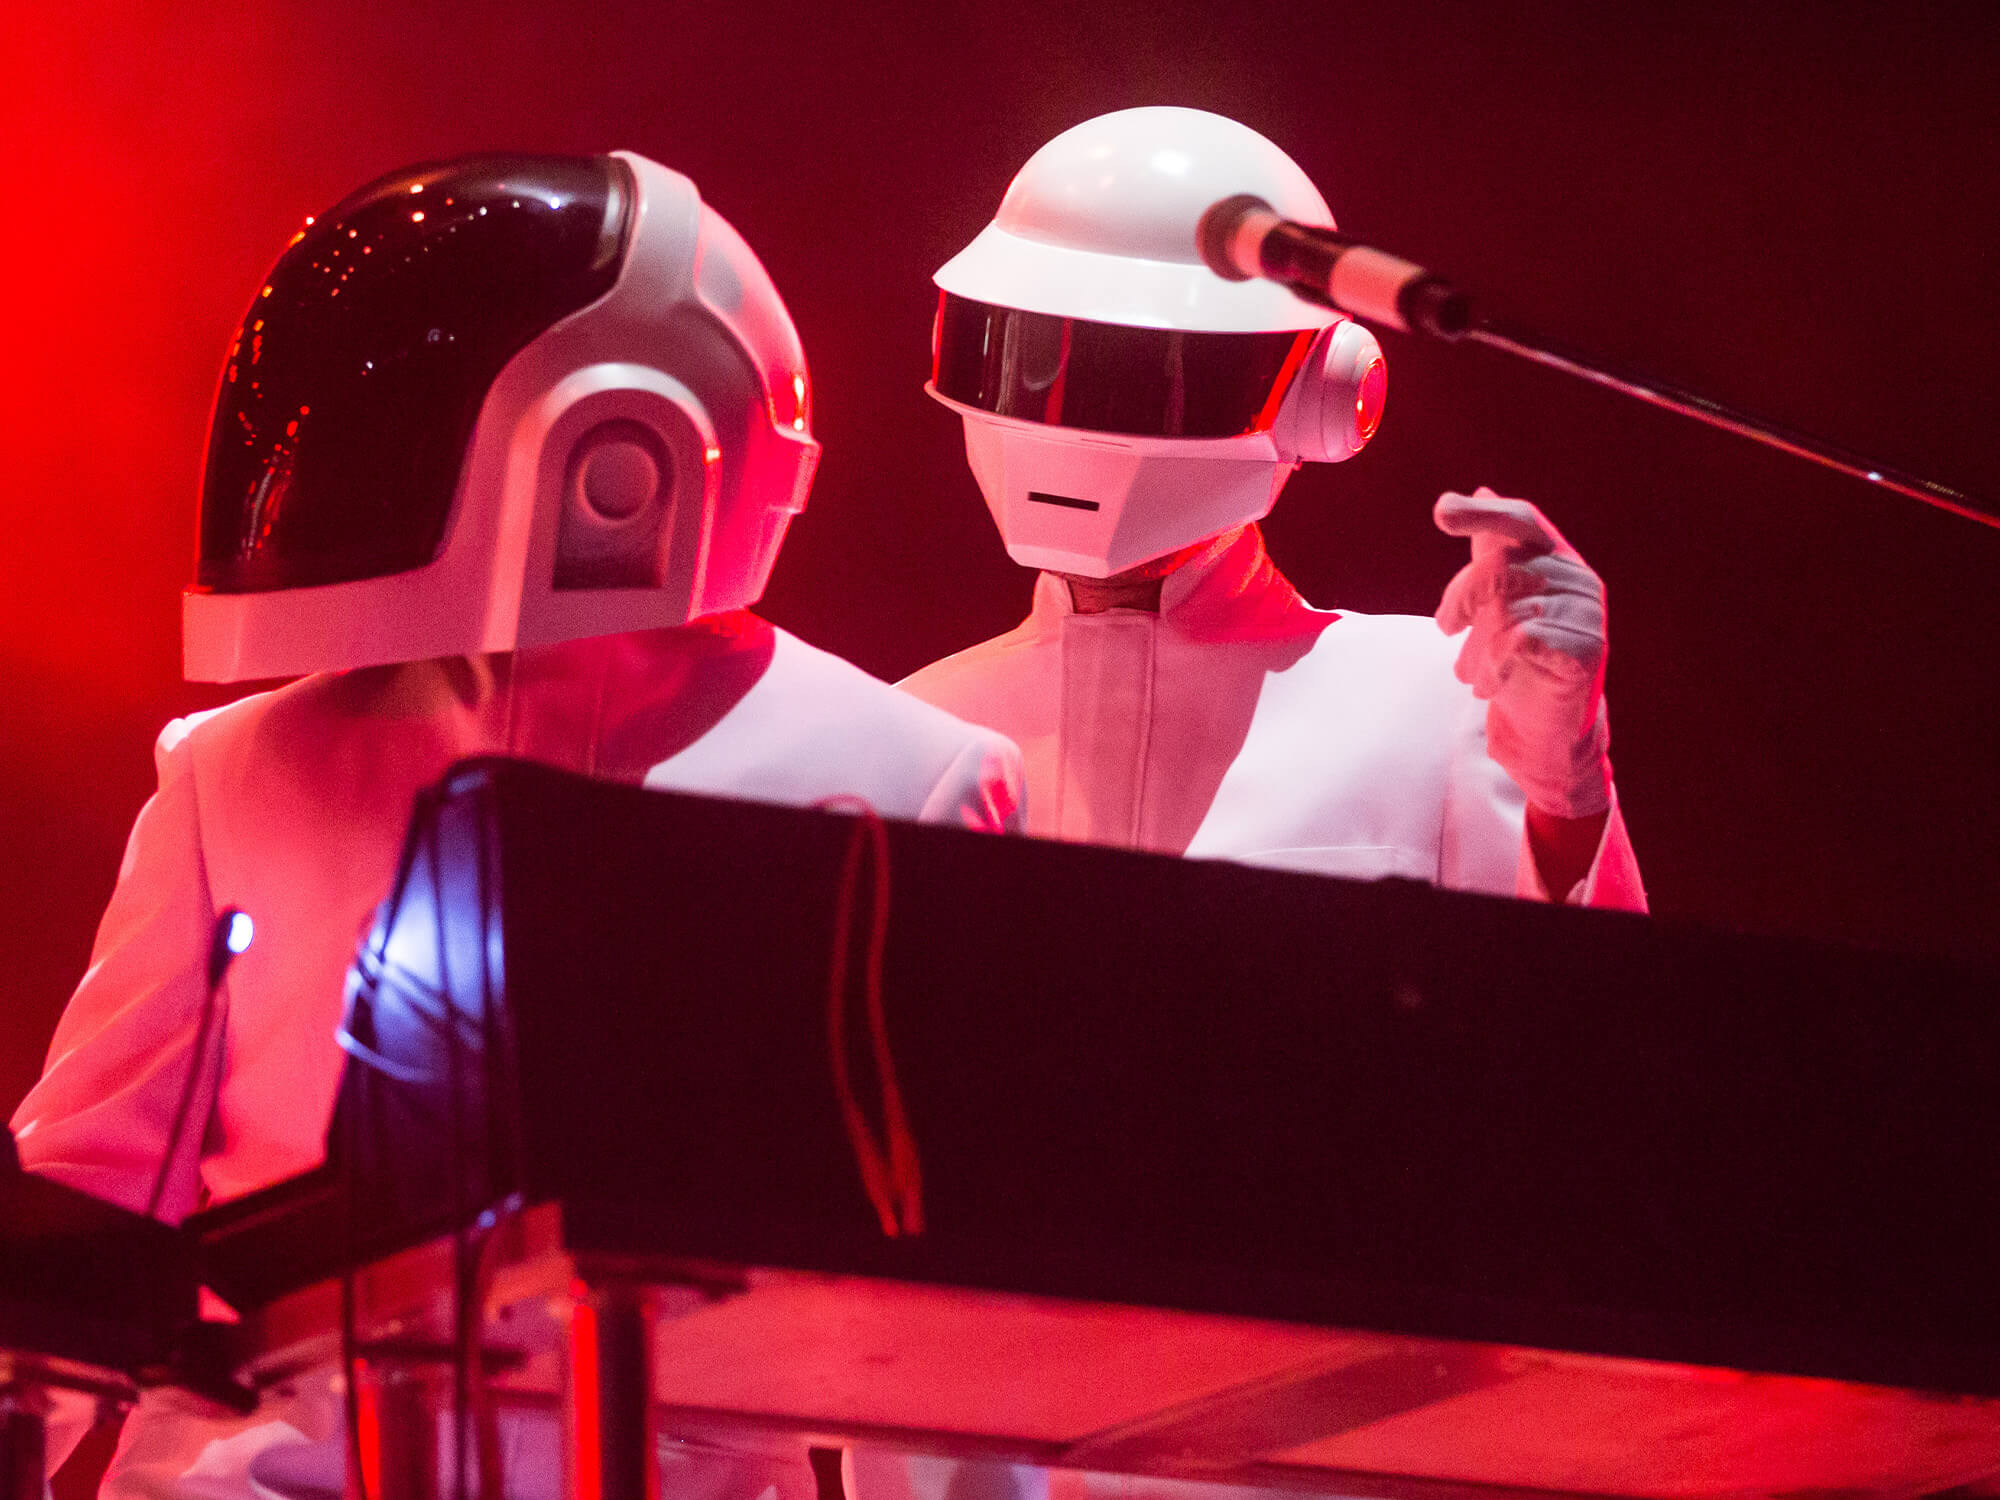 Daft Punk reunion: “I wouldn't count it out”, says Todd Edwards